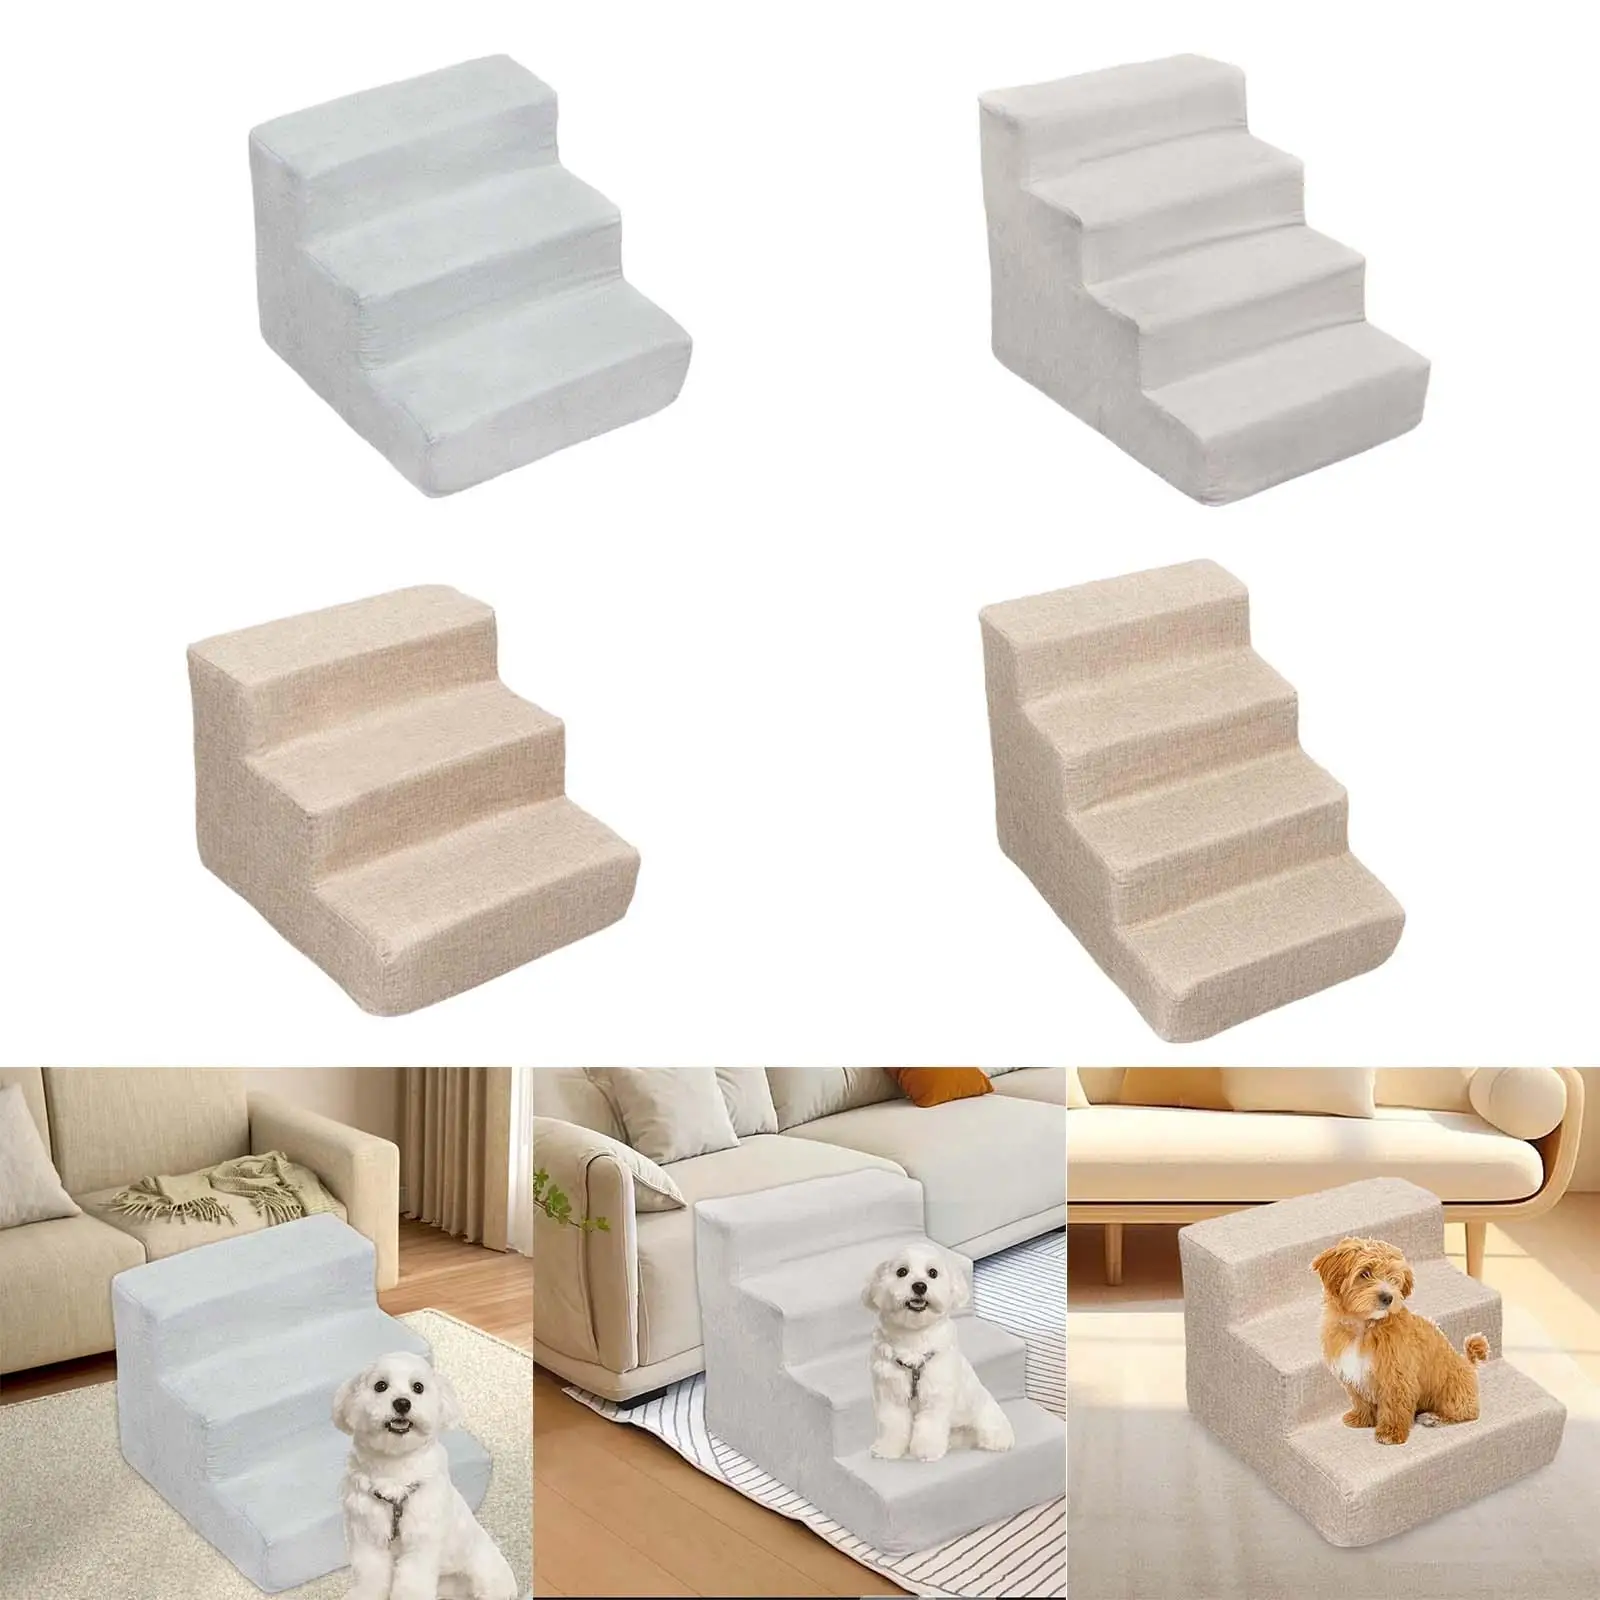 Dog Stairs Portable Gentle Slope Shape Sturdy Stable Convenient for Bed Couch Sofa Chair Removable Cover Versatile Non Slip